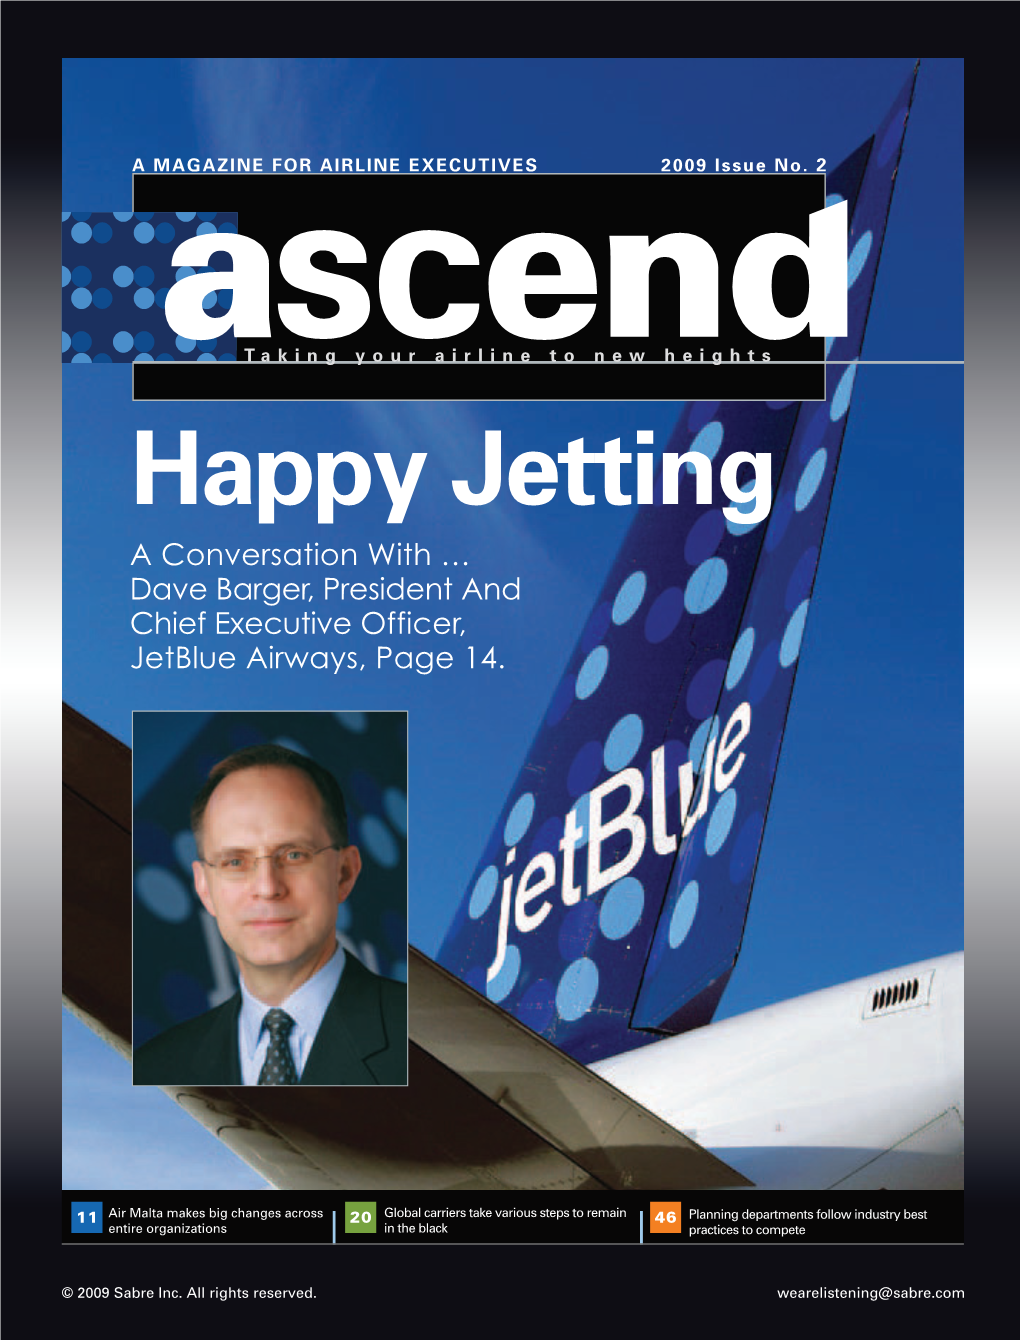 Happy Jetting a Conversation with … Dave Barger, President and Chief Executive Officer, Jetblue Airways, Page 14